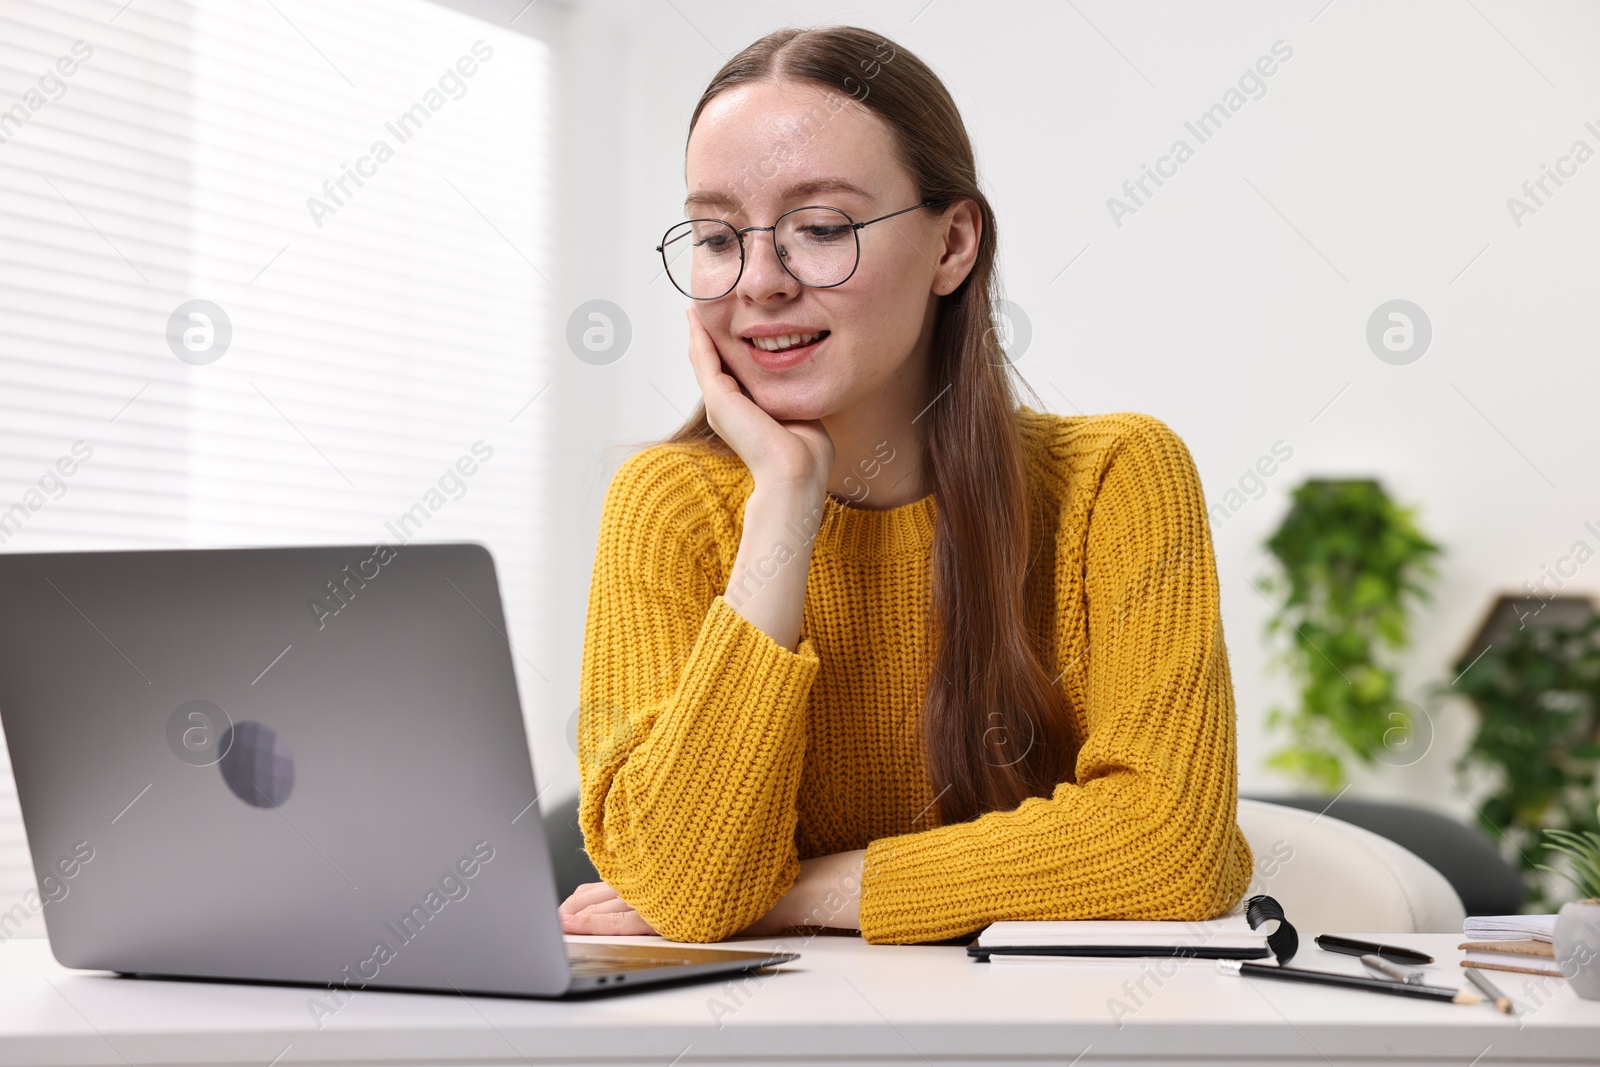 Photo of E-learning. Young woman using laptop during online lesson at white table indoors